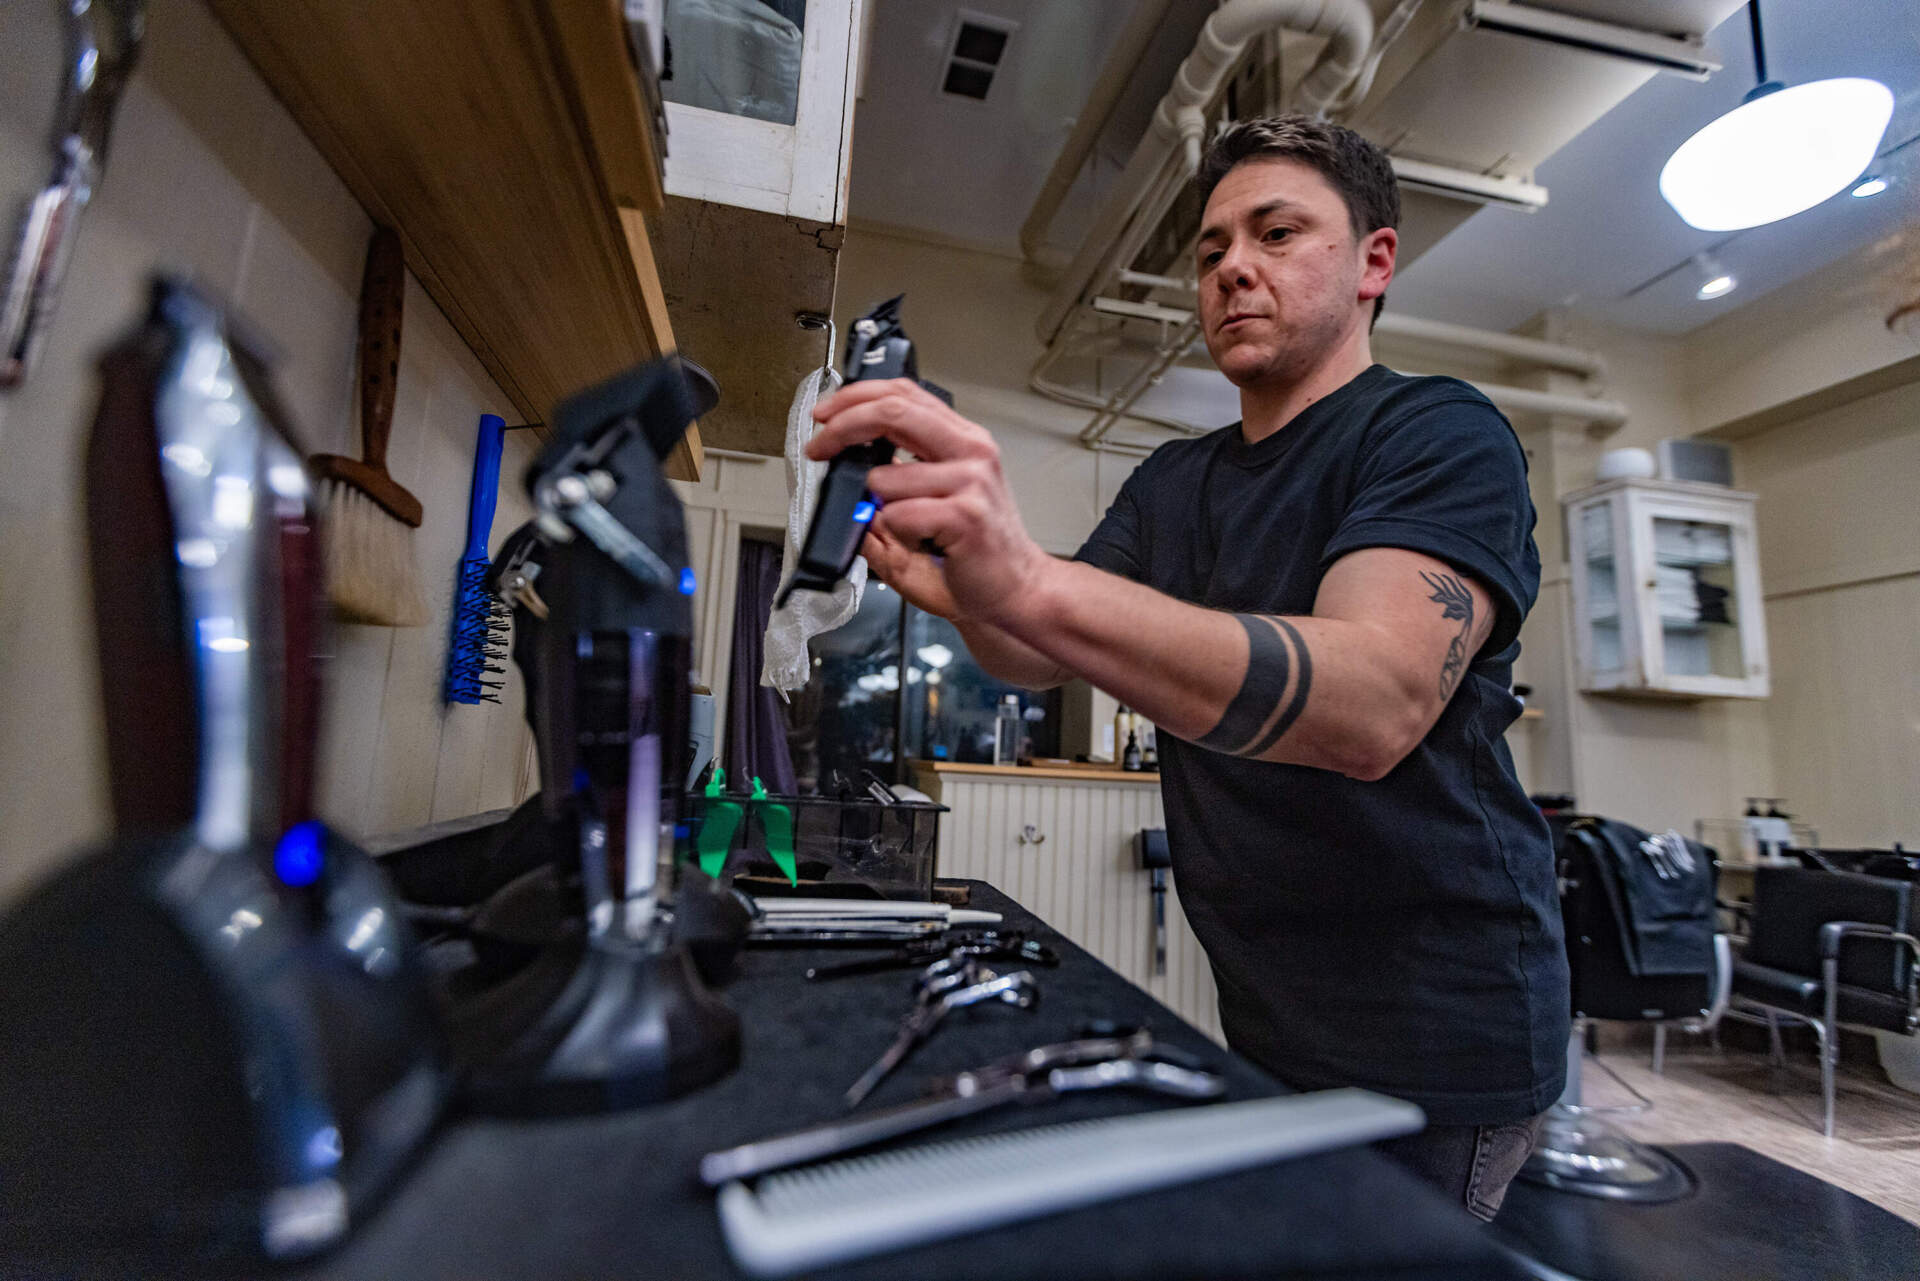 M Arida grabs a pair of hair clippers before working on a client. (Jesse Costa/WBUR)